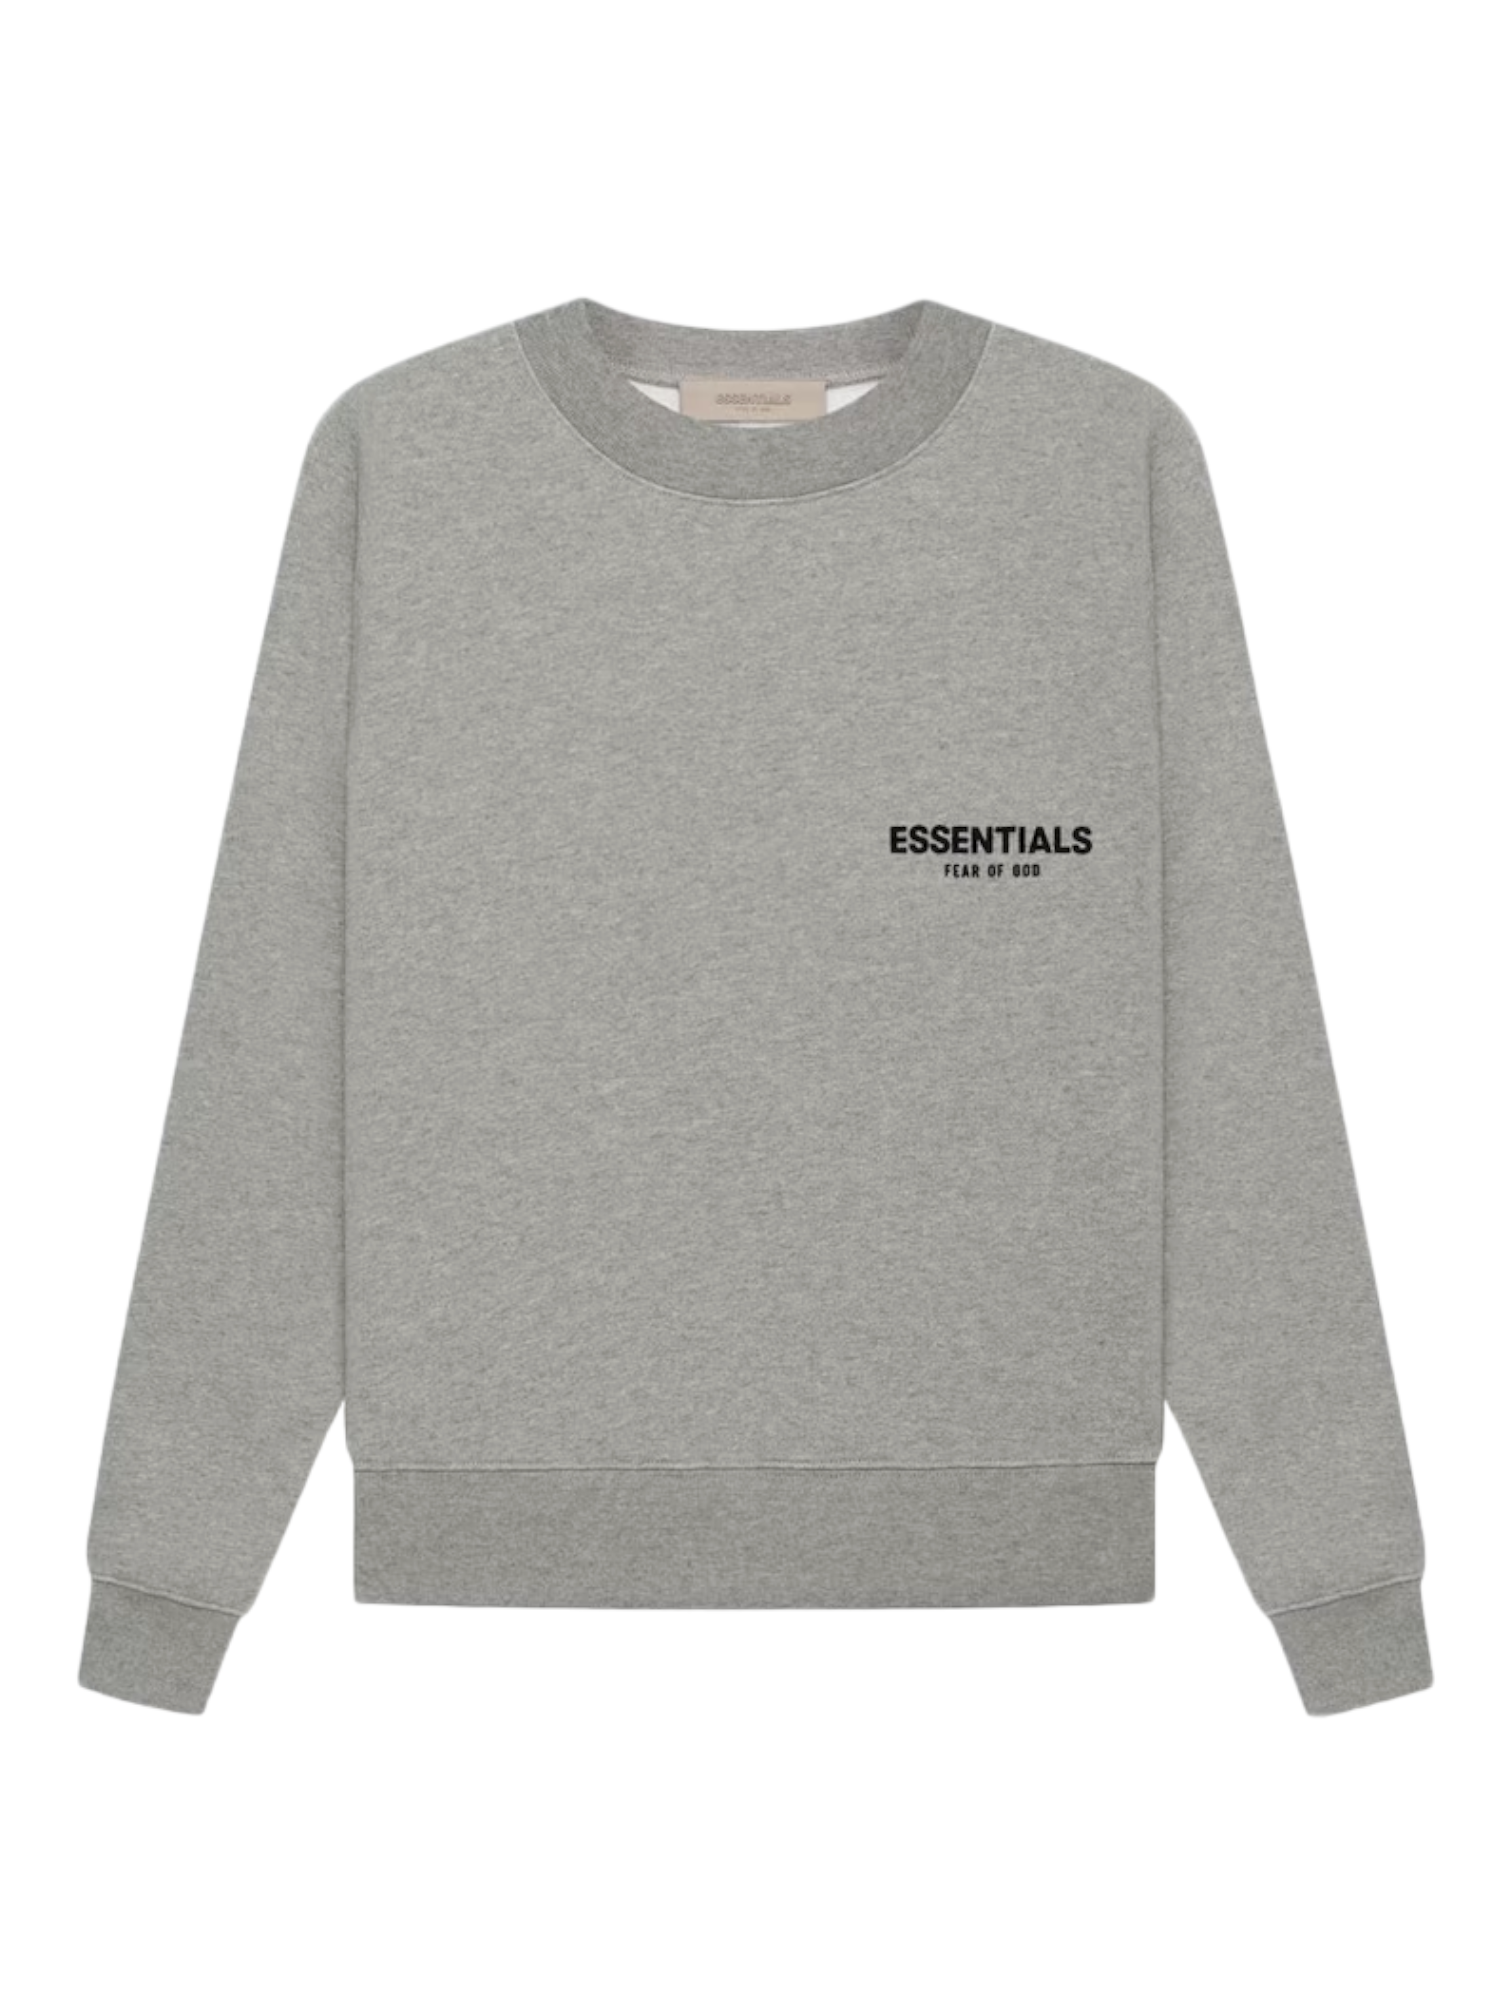 Essentials Fear of God Dark Heather Oatmeal Crewneck Sweatshirt SS22 - Genuine Design Luxury Consignment Calgary, Canada New & Pre-Owned Authentic Clothing, Shoes, Accessories.